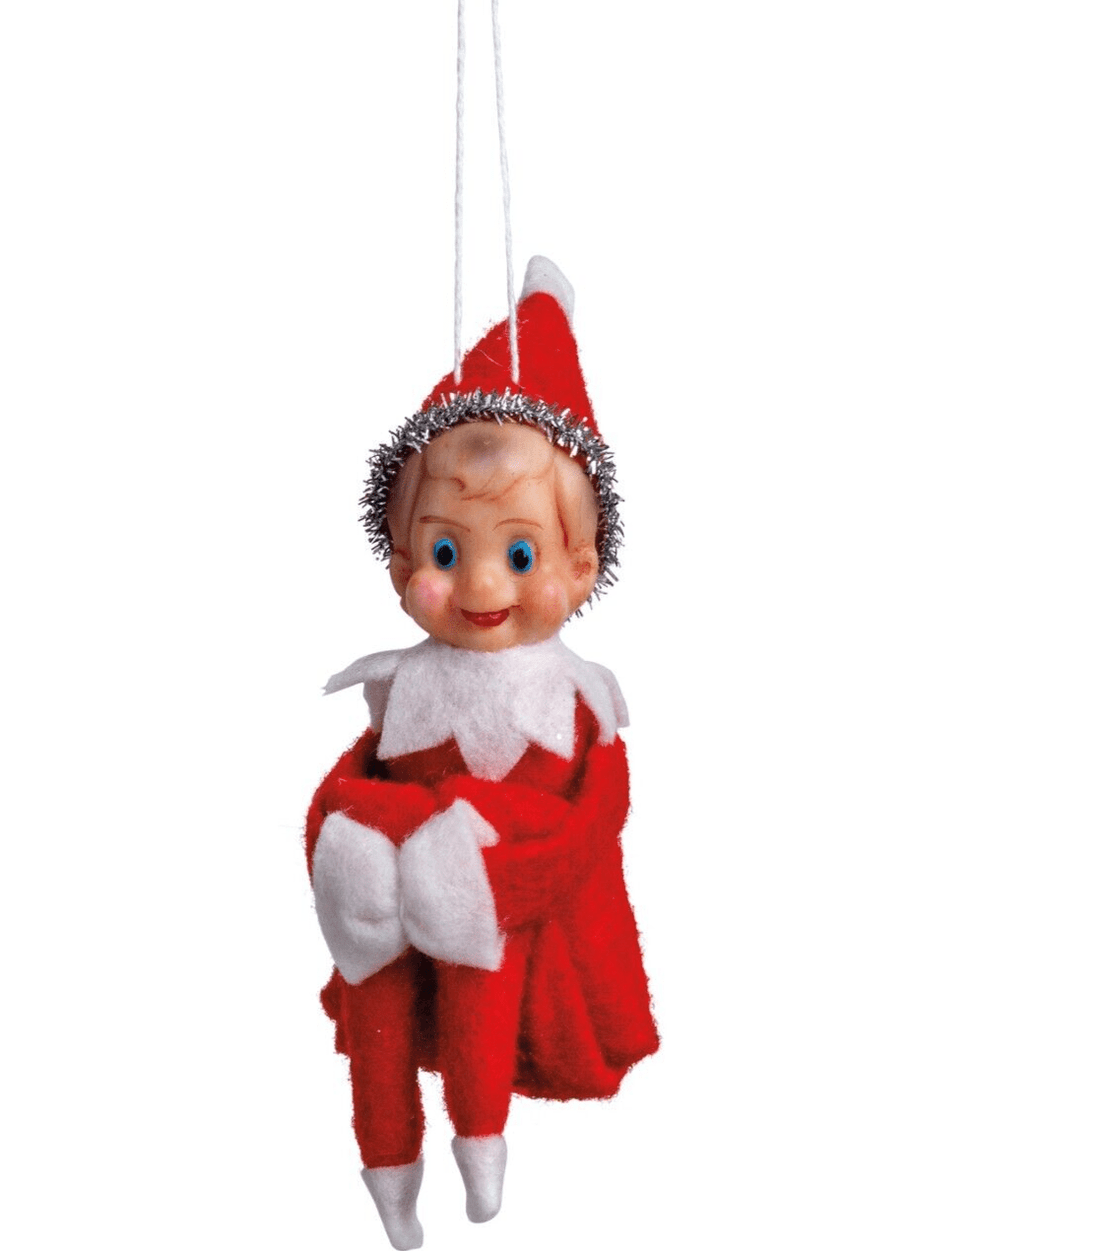 Retro Looking Hanging Christmas Elf Ornament 5.25&quot; - The Primitive Pineapple Collection